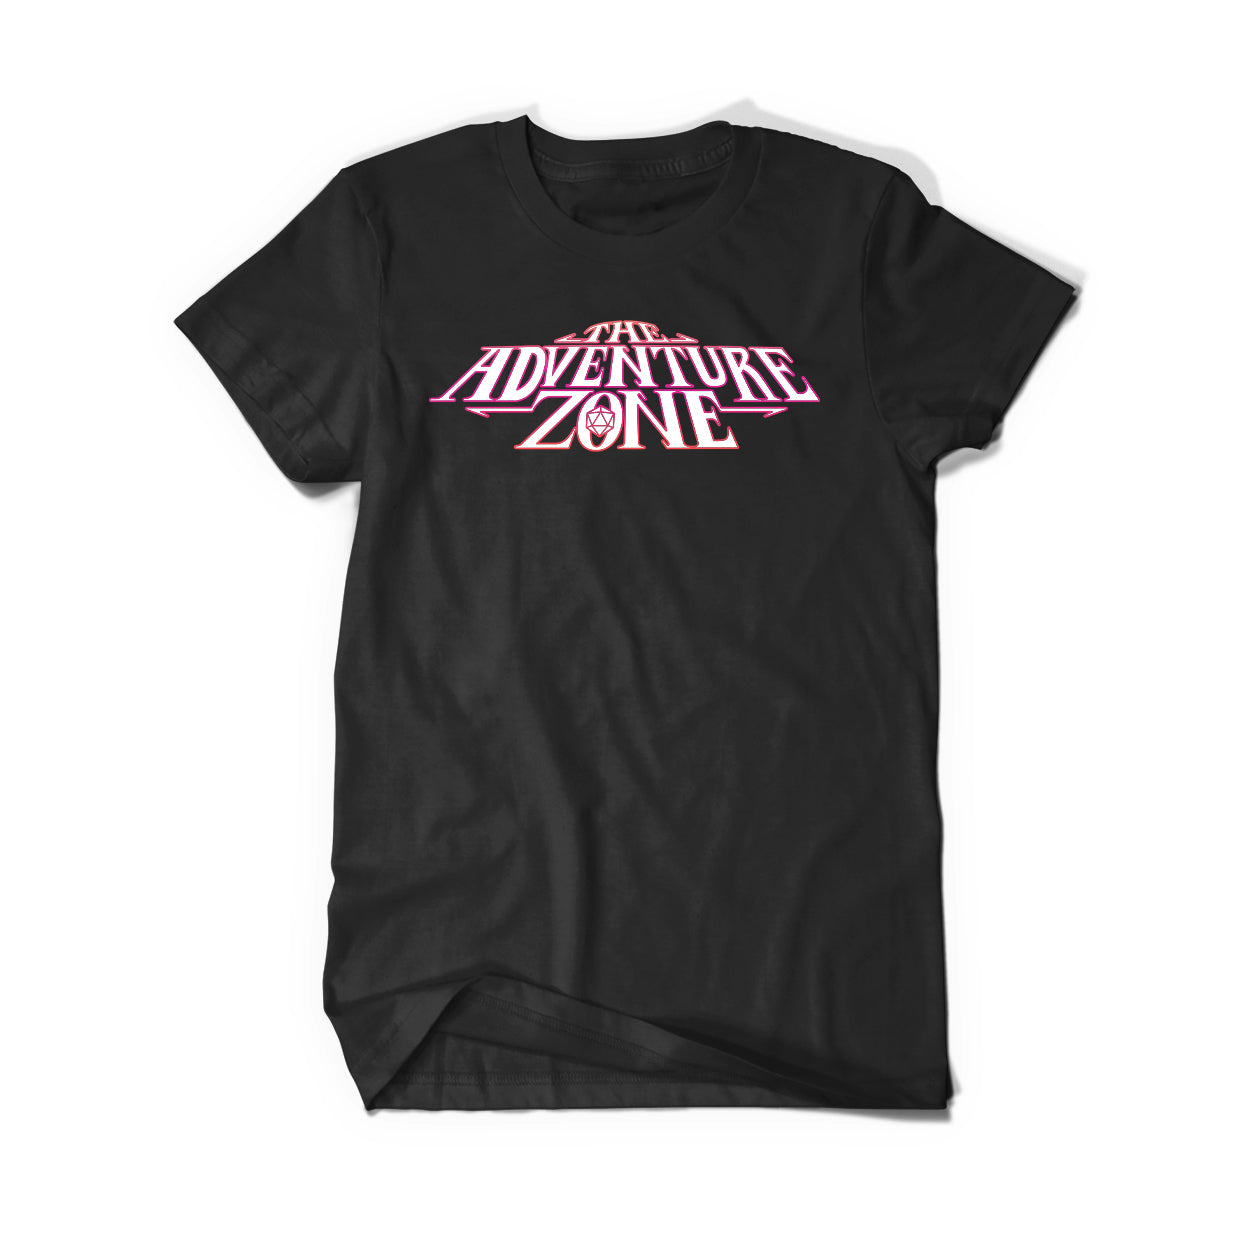 A black shirt that says, "The Adventure Zone" in white and pink.